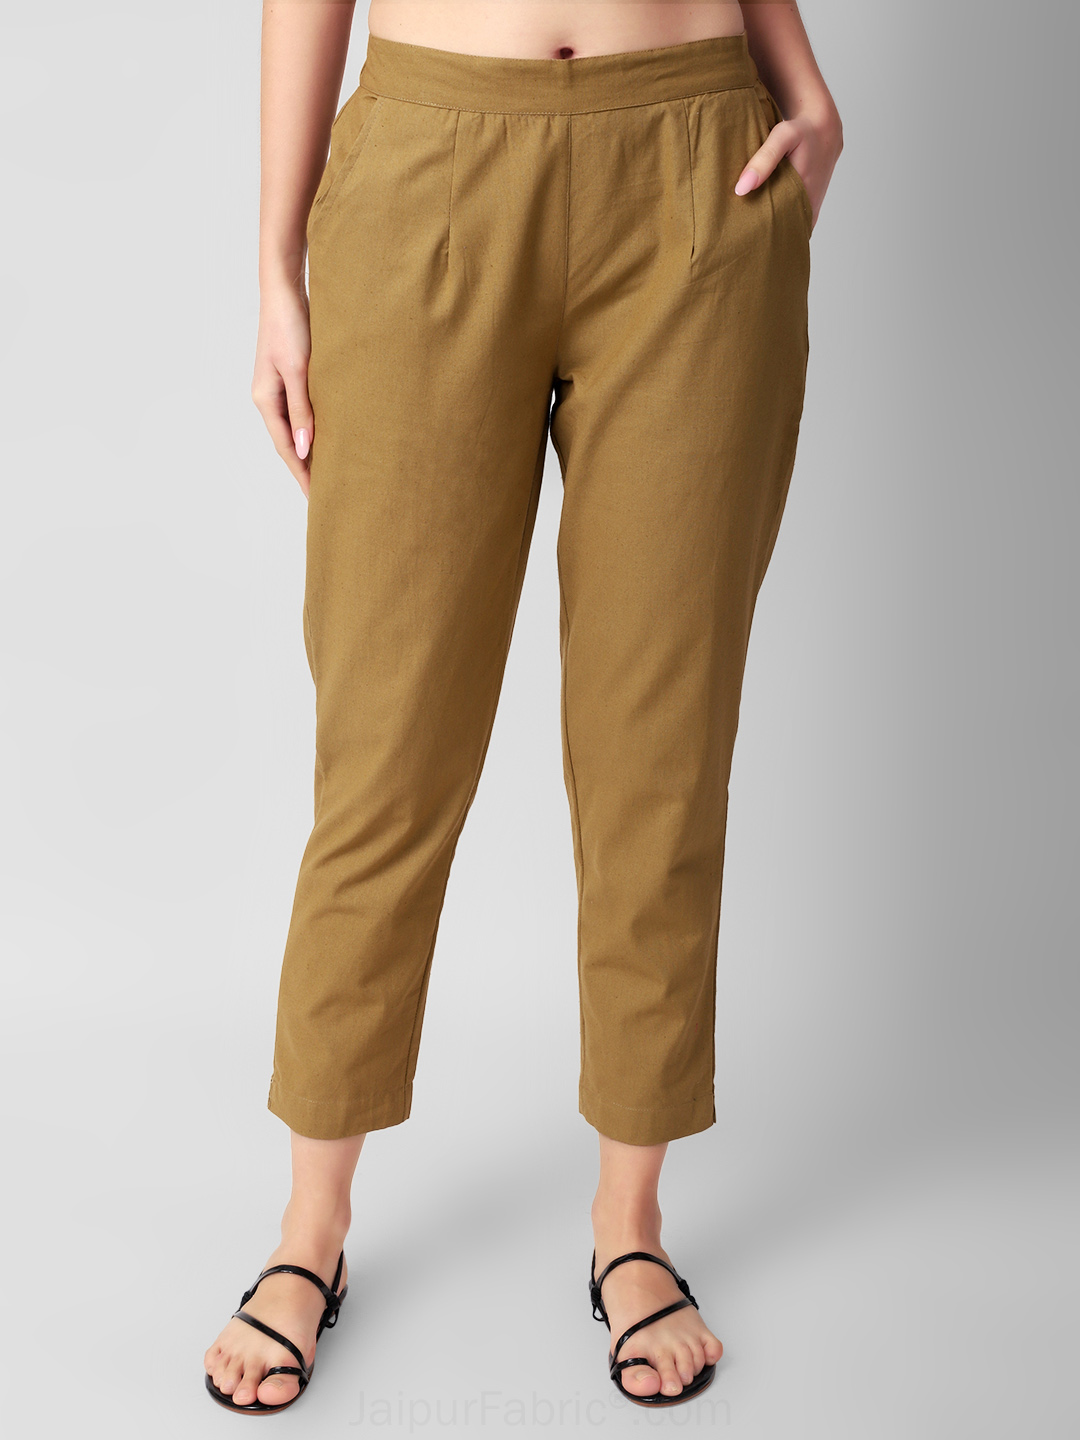 Tortilla Brown Women Cotton Pants casual and semi formal daily trousers